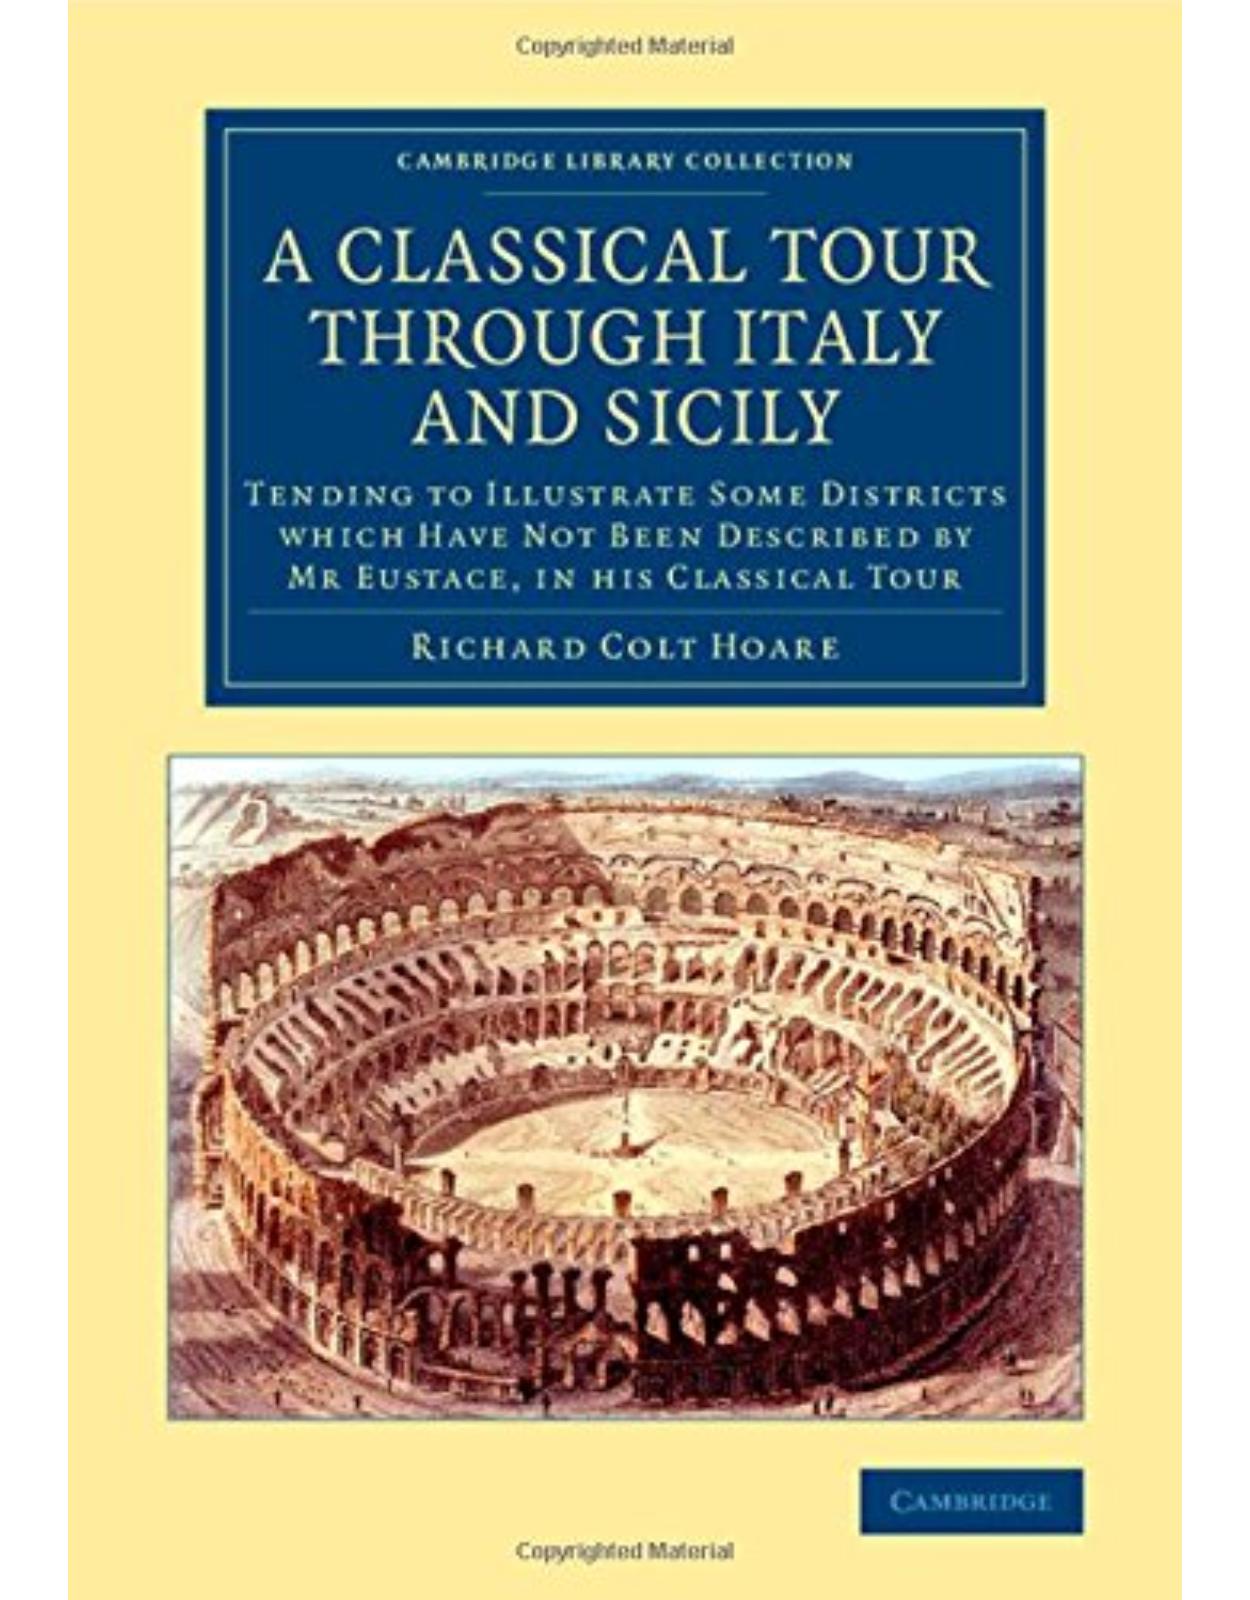 A Classical Tour through Italy and Sicily: Tending to Illustrate Some Districts Which Have Not Been Described by Mr Eustace, in his Classical Tour (Cambridge Library Collection - Archaeology)